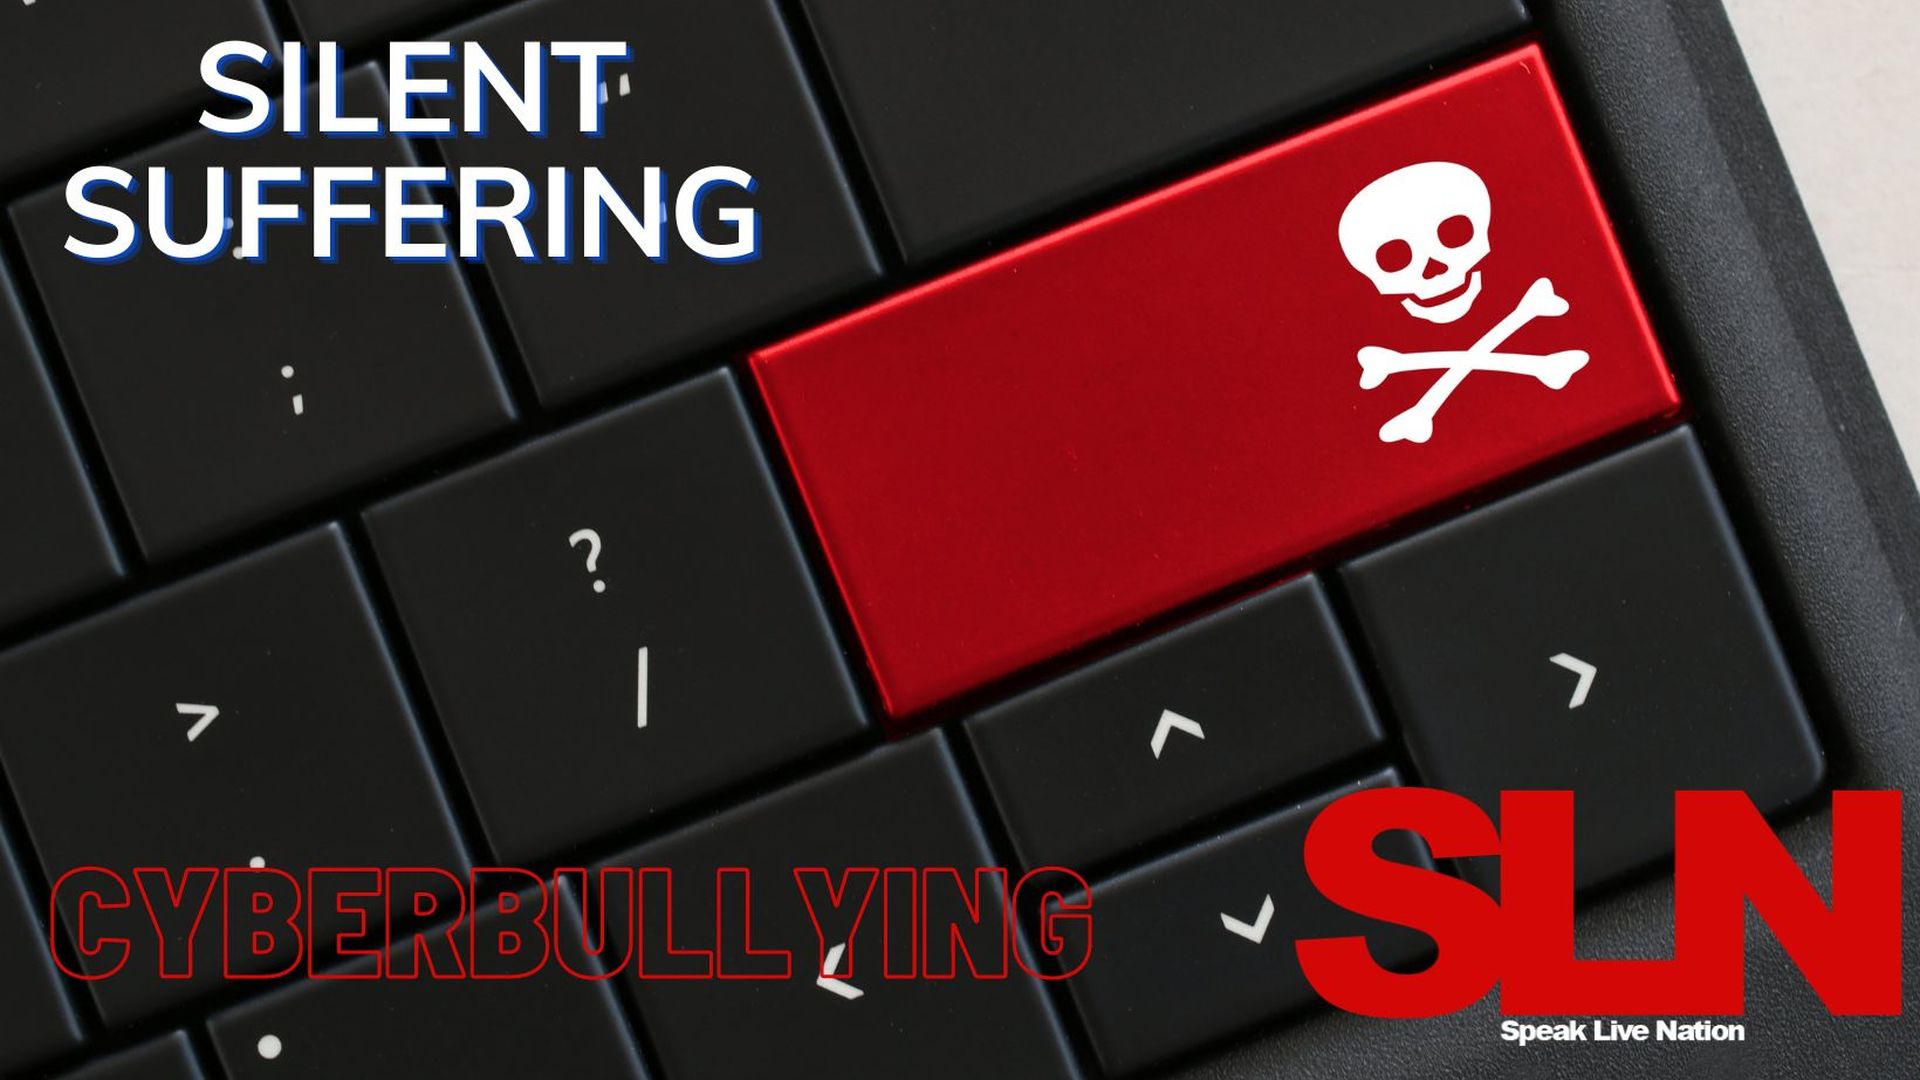 SHOCKING FACTS ABOUT BULLYING PART 2